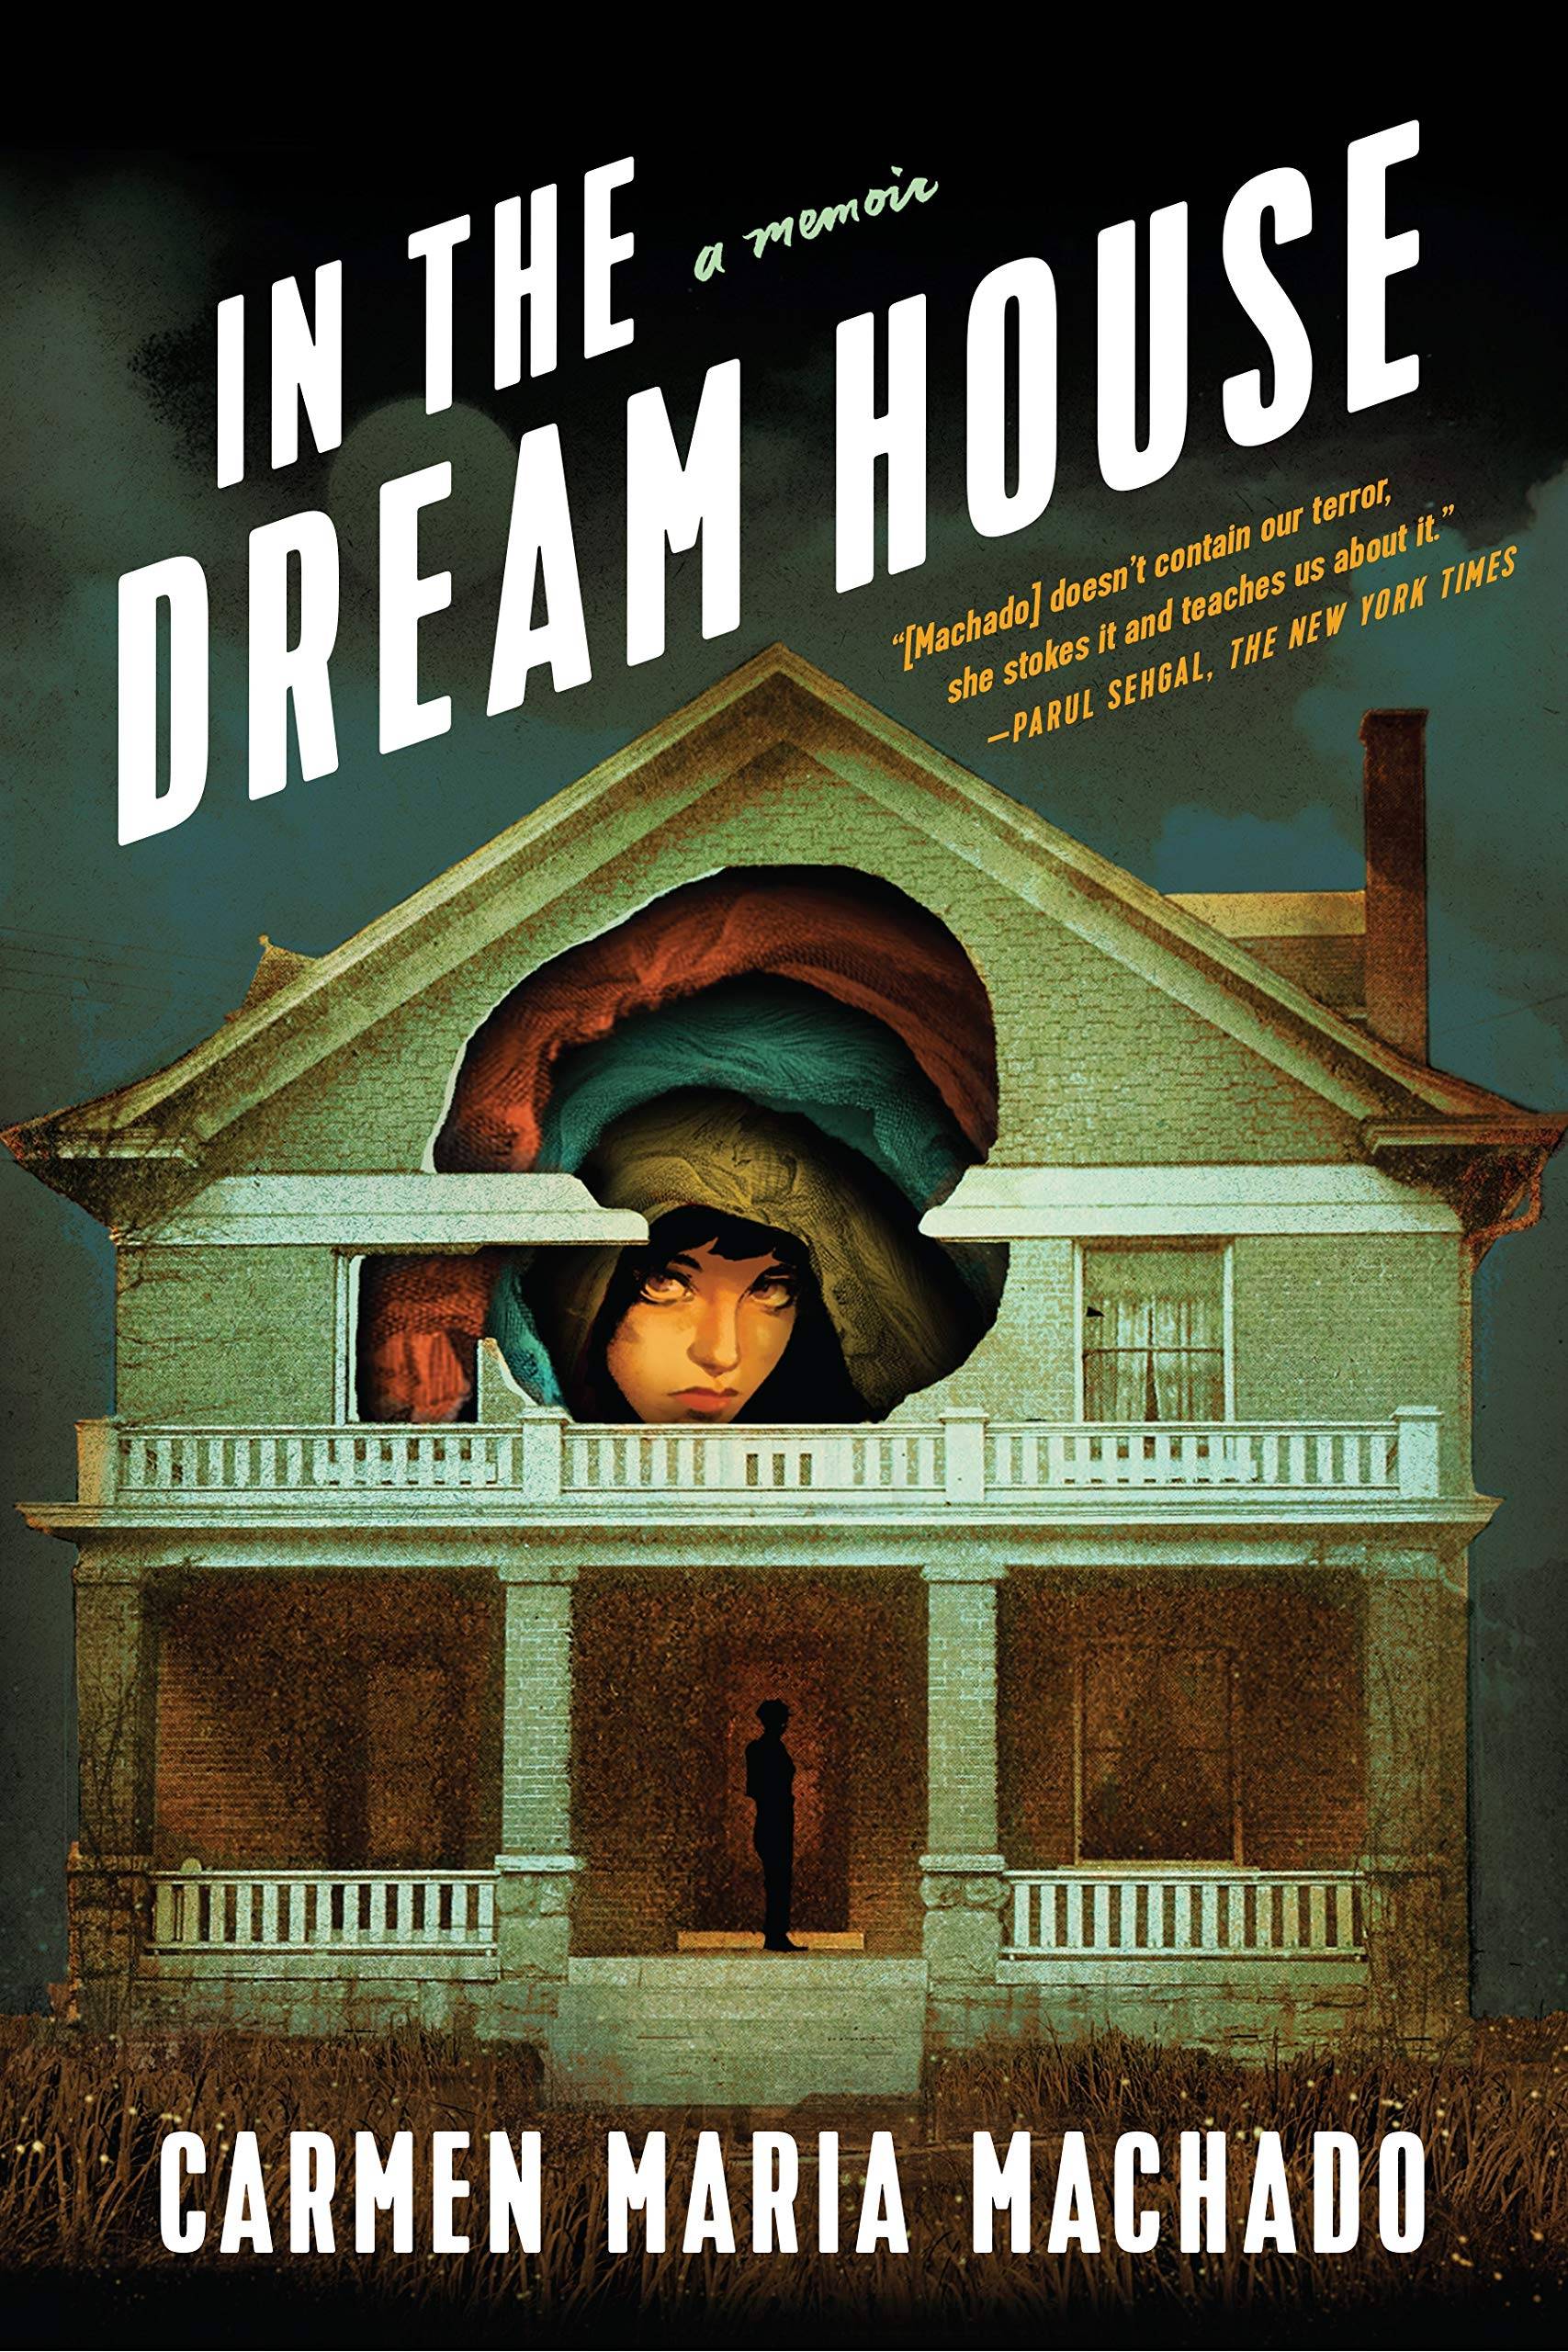 "in the dream house" cover featuring a hiding face looking out from a large hole on the second floor of a house.